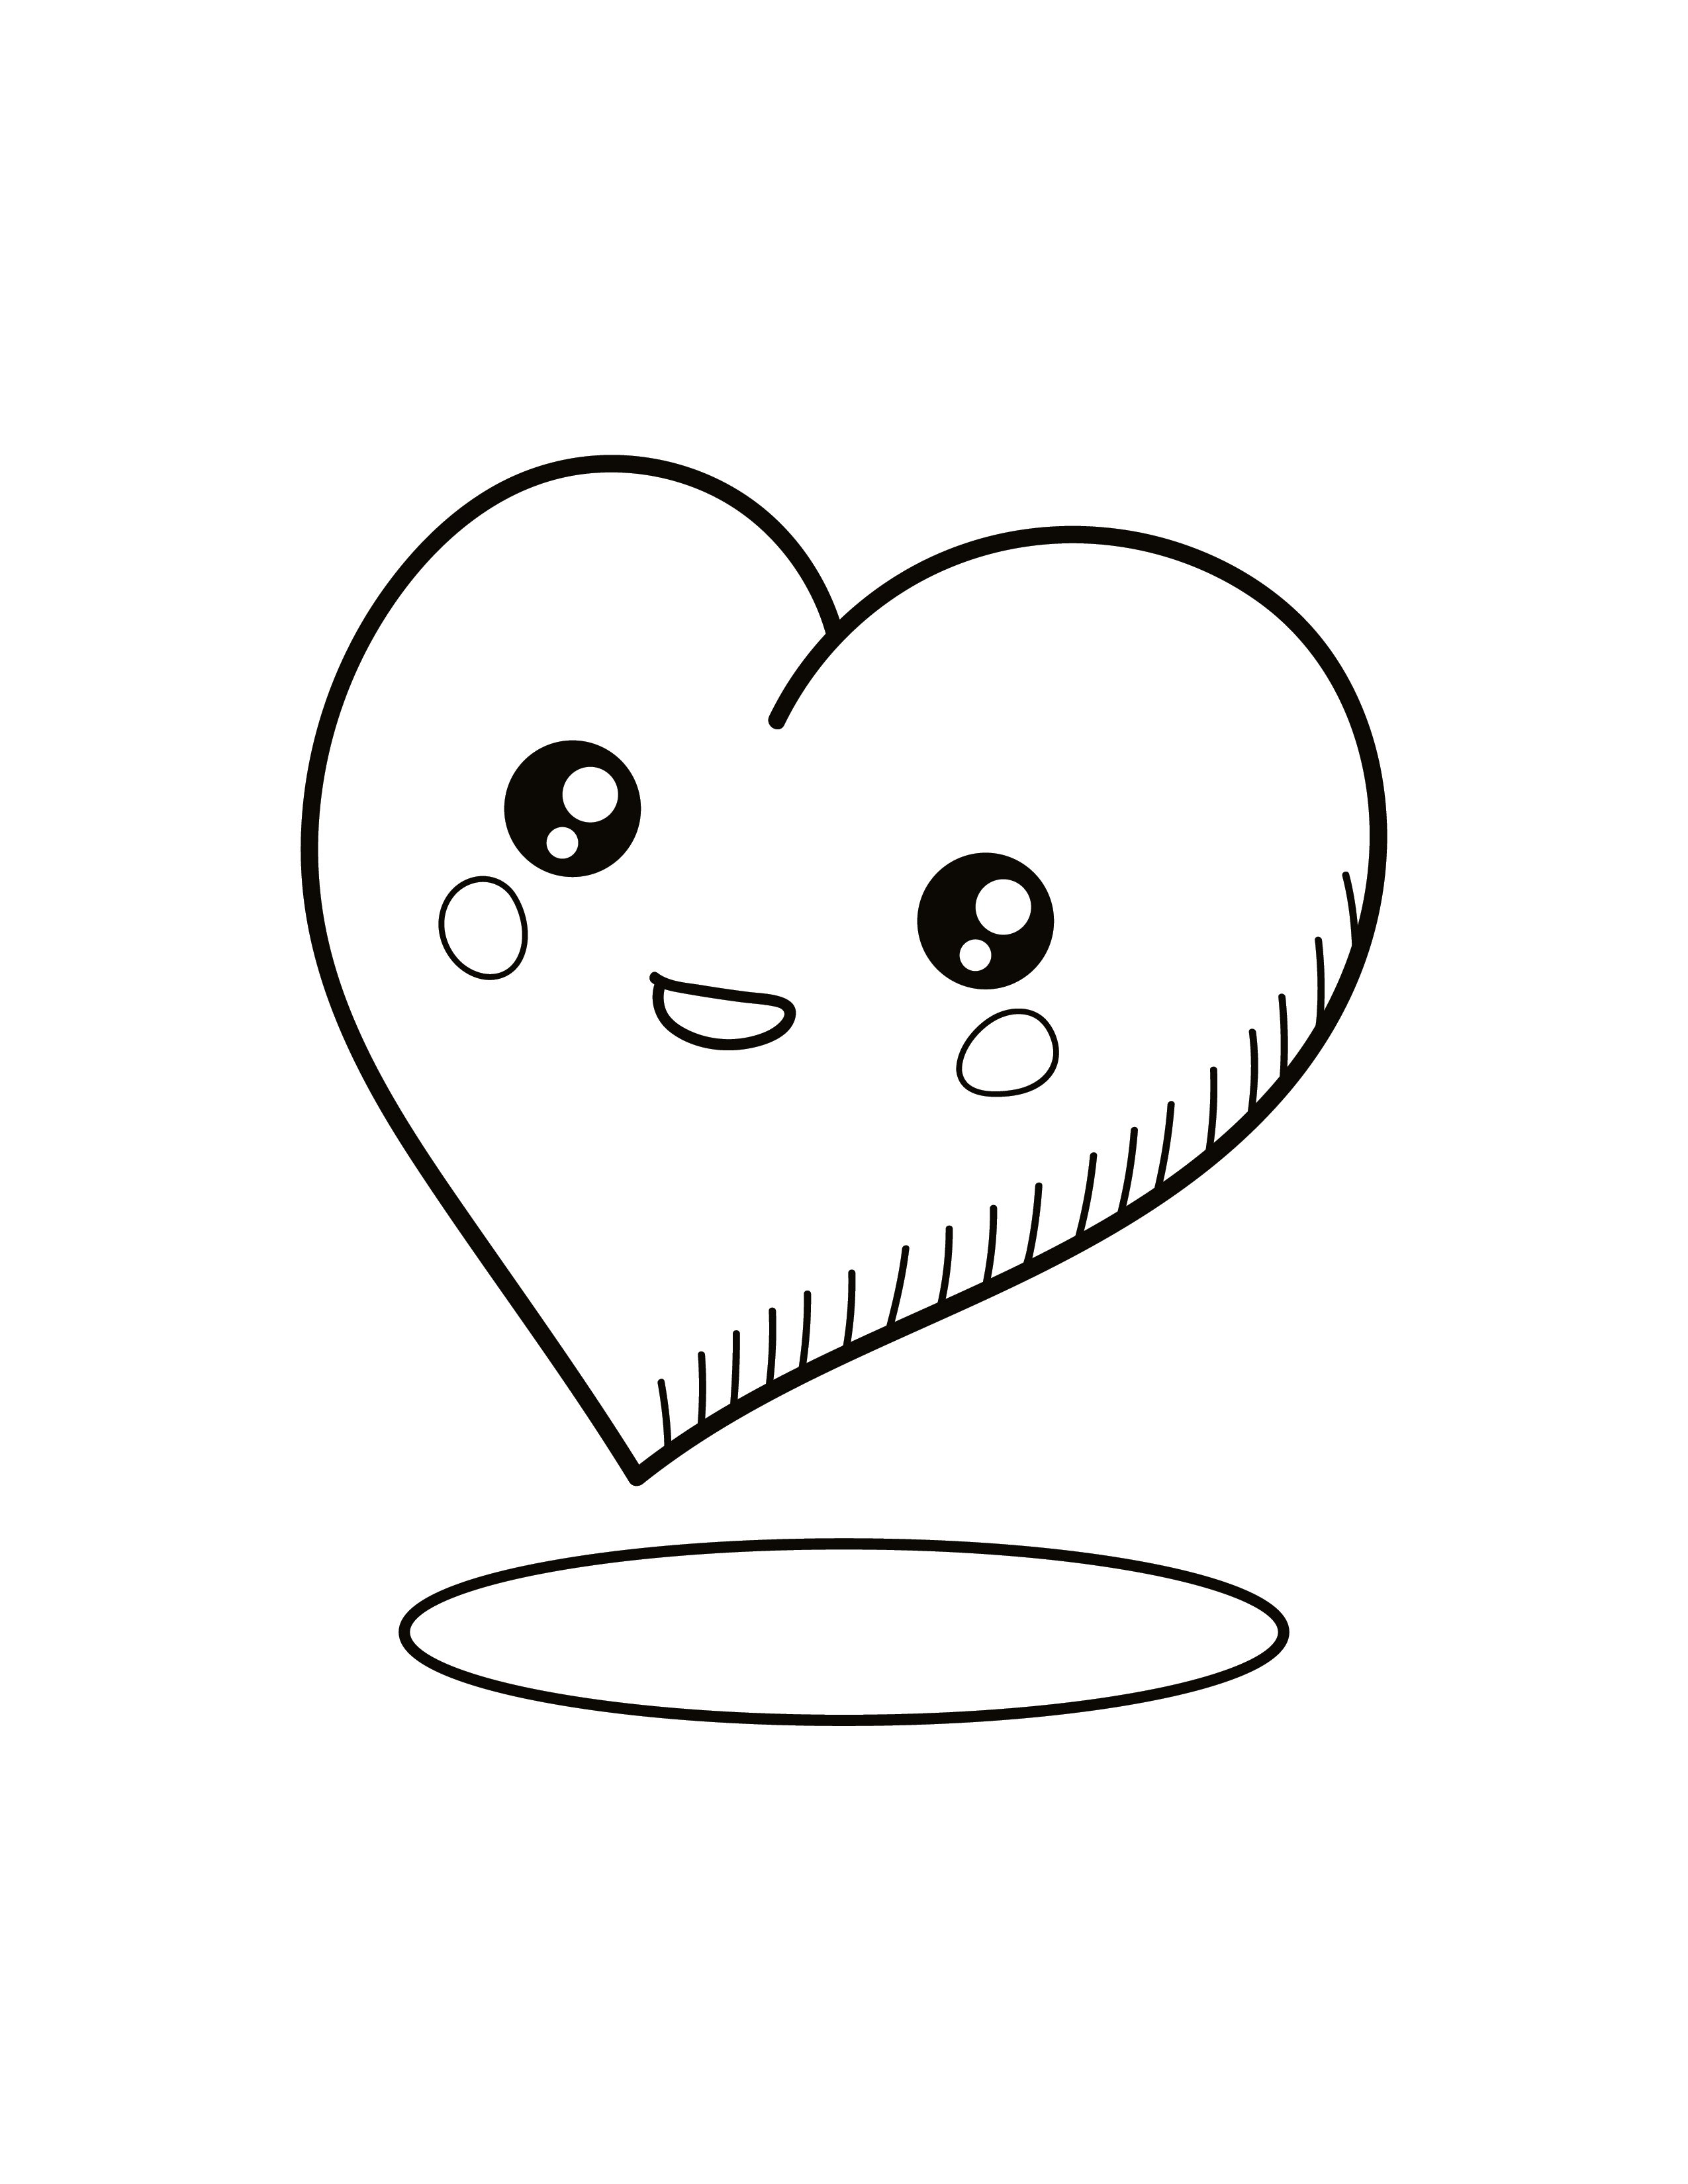 Printable Cute Heart Coloring Pages